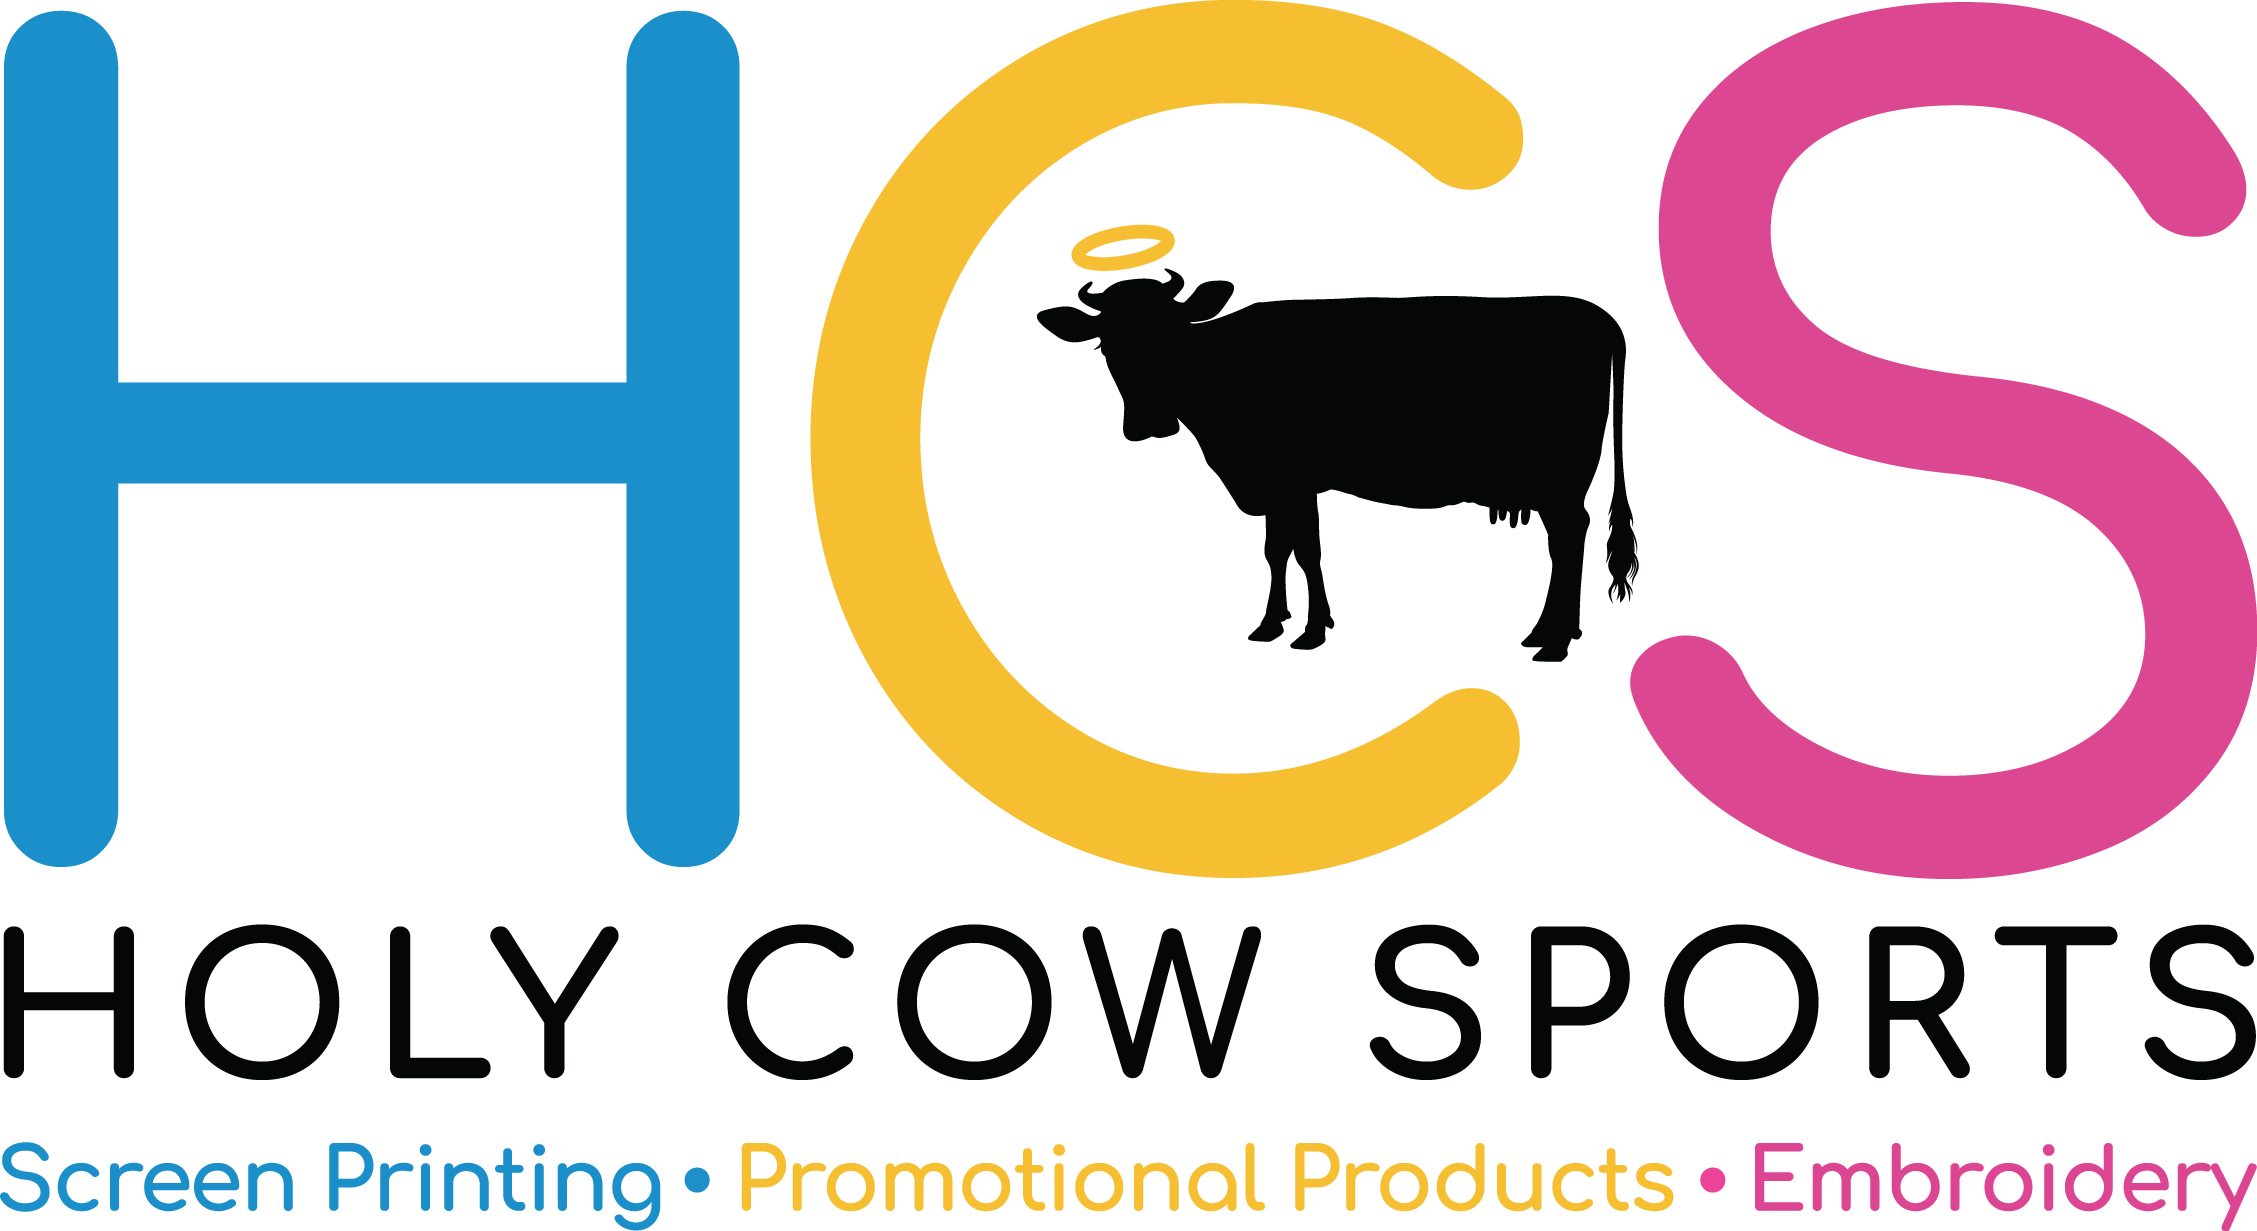 Product Results - Holy Cow Sports